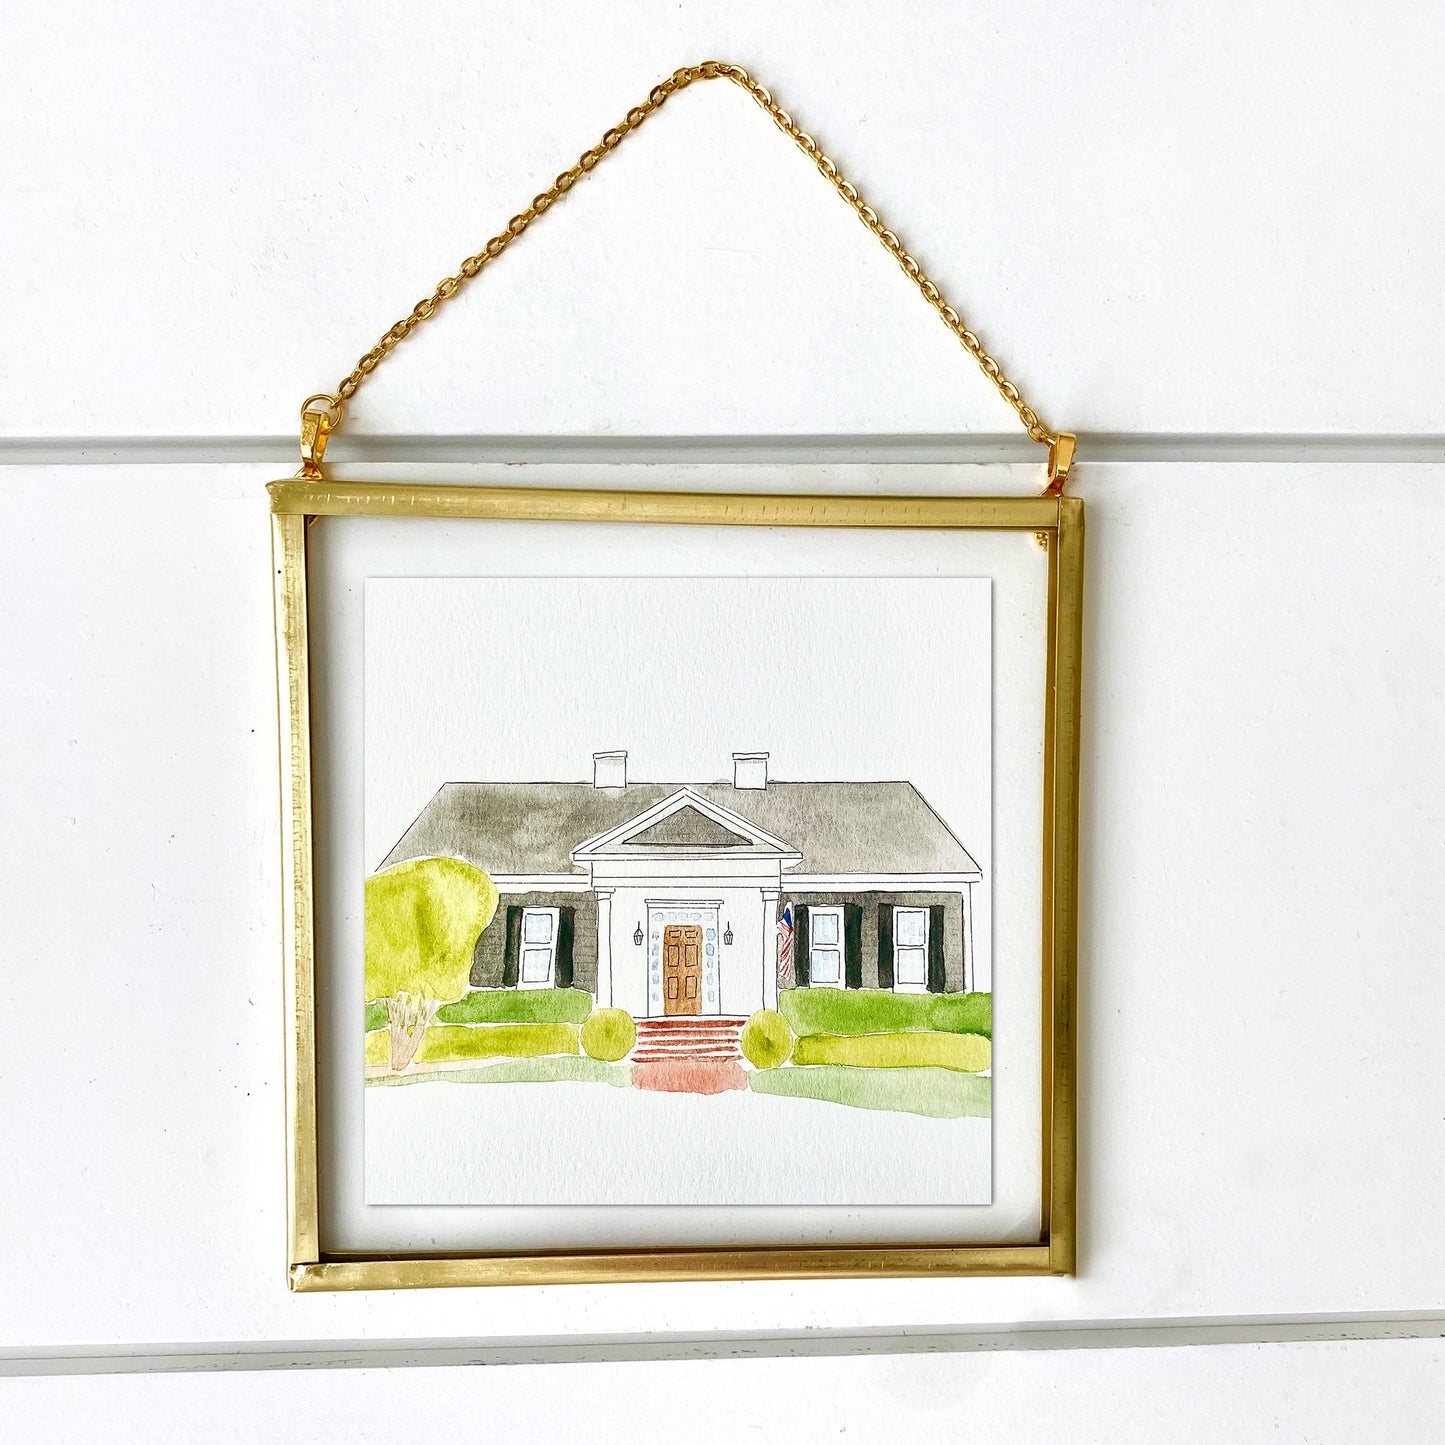 Personalized Watercolor House Ornament